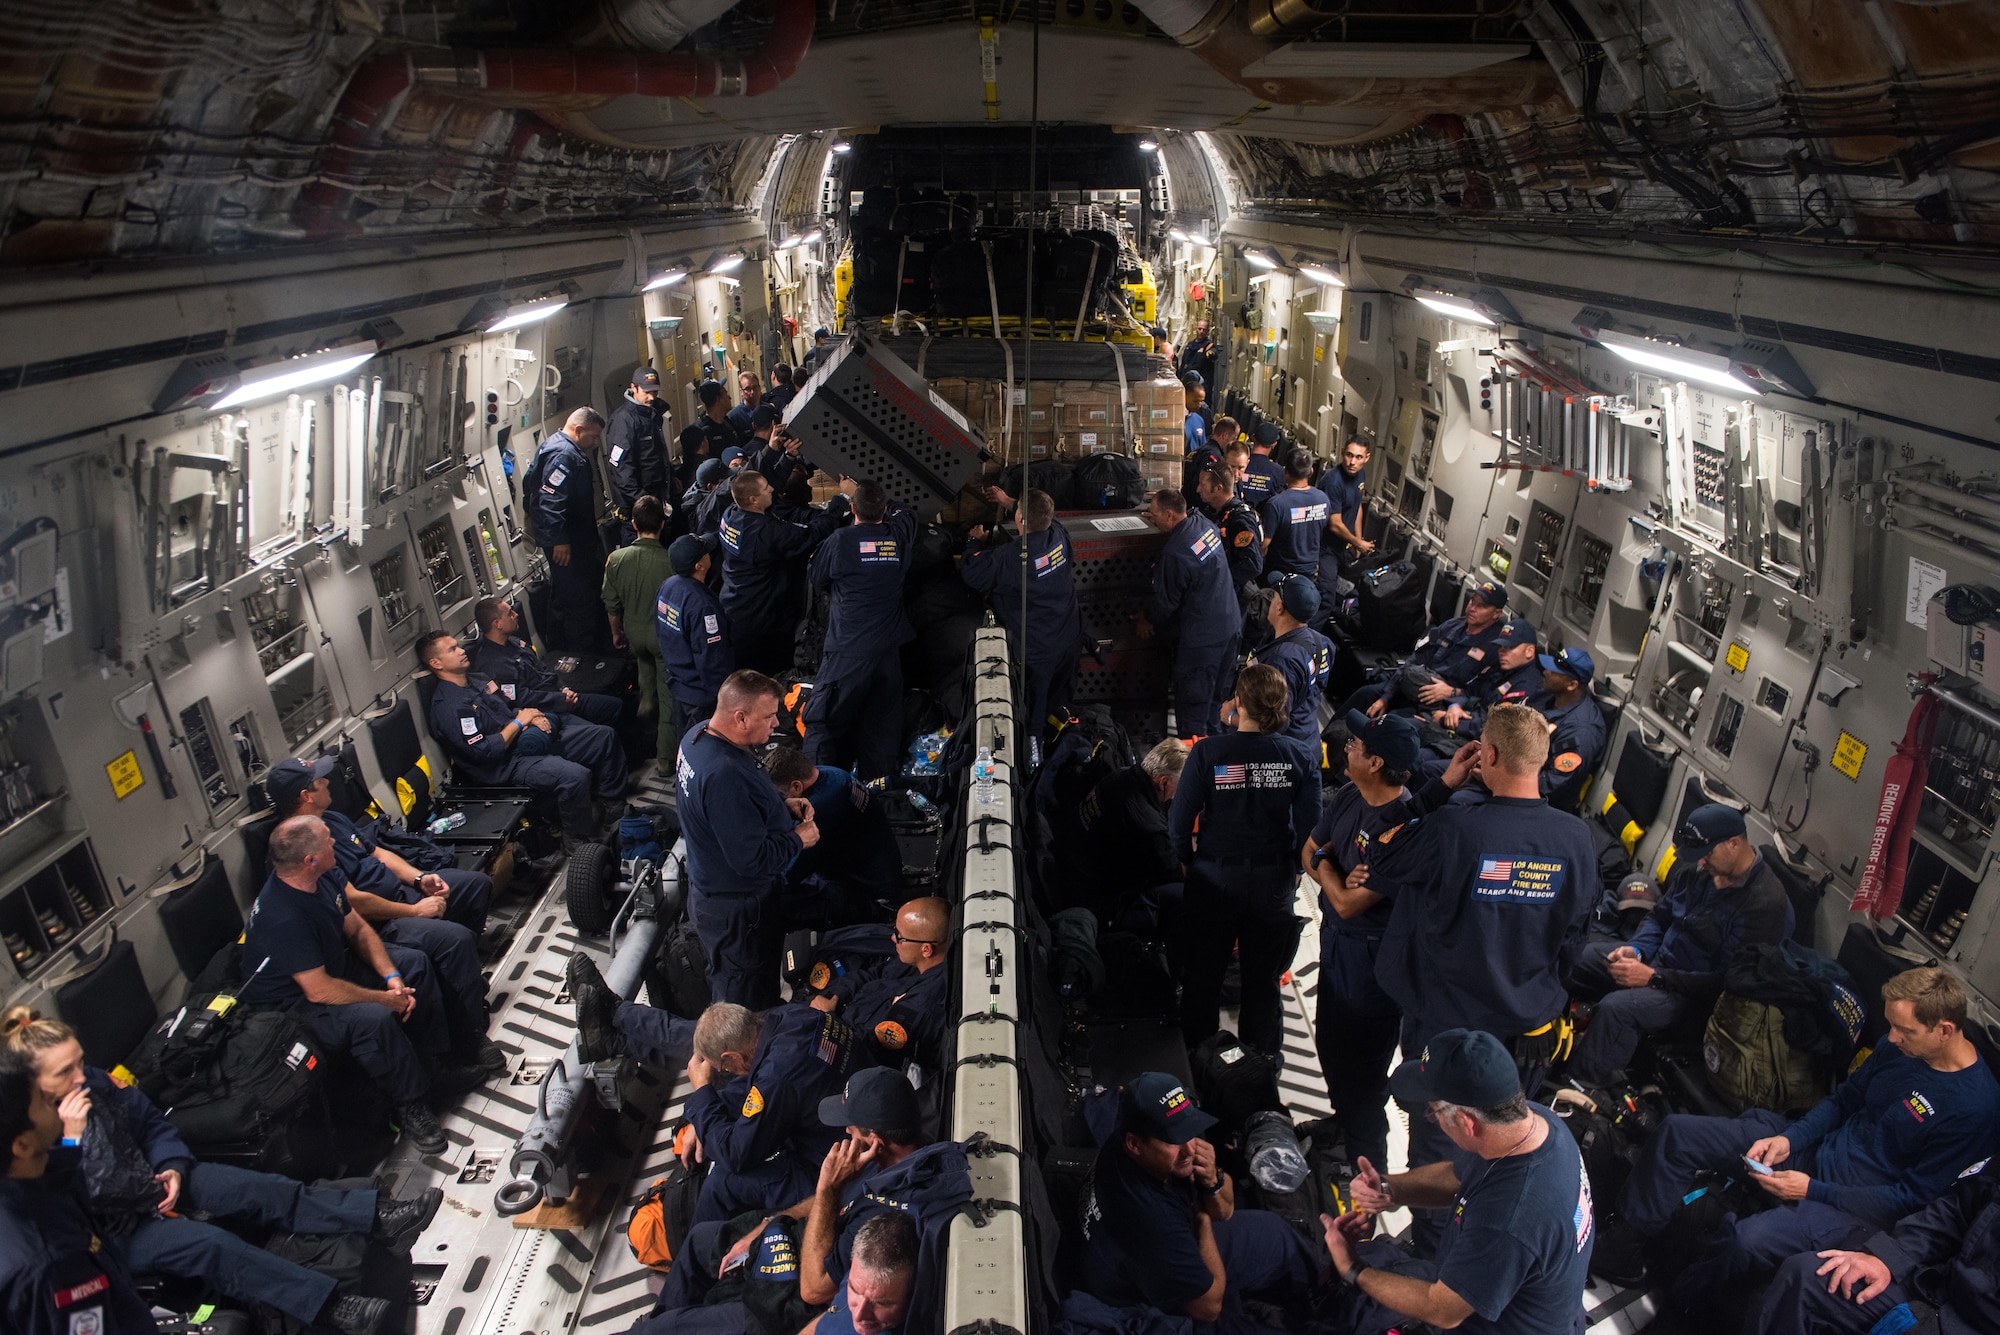 Members of a U.S. Agency for International Development elite disaster prepare to fly on a Travis Air Force Base C-17 Globemaster III at March Air Reserve Base, Calif., Sept. 20, 2017. At the request of the Mexican government, the team was headed for Mexico to support search and rescue efforts after a 7.1 magnitude earthquake struck the country.  (U.S. Air Force photo by Master Sgt. Joseph Swafford)